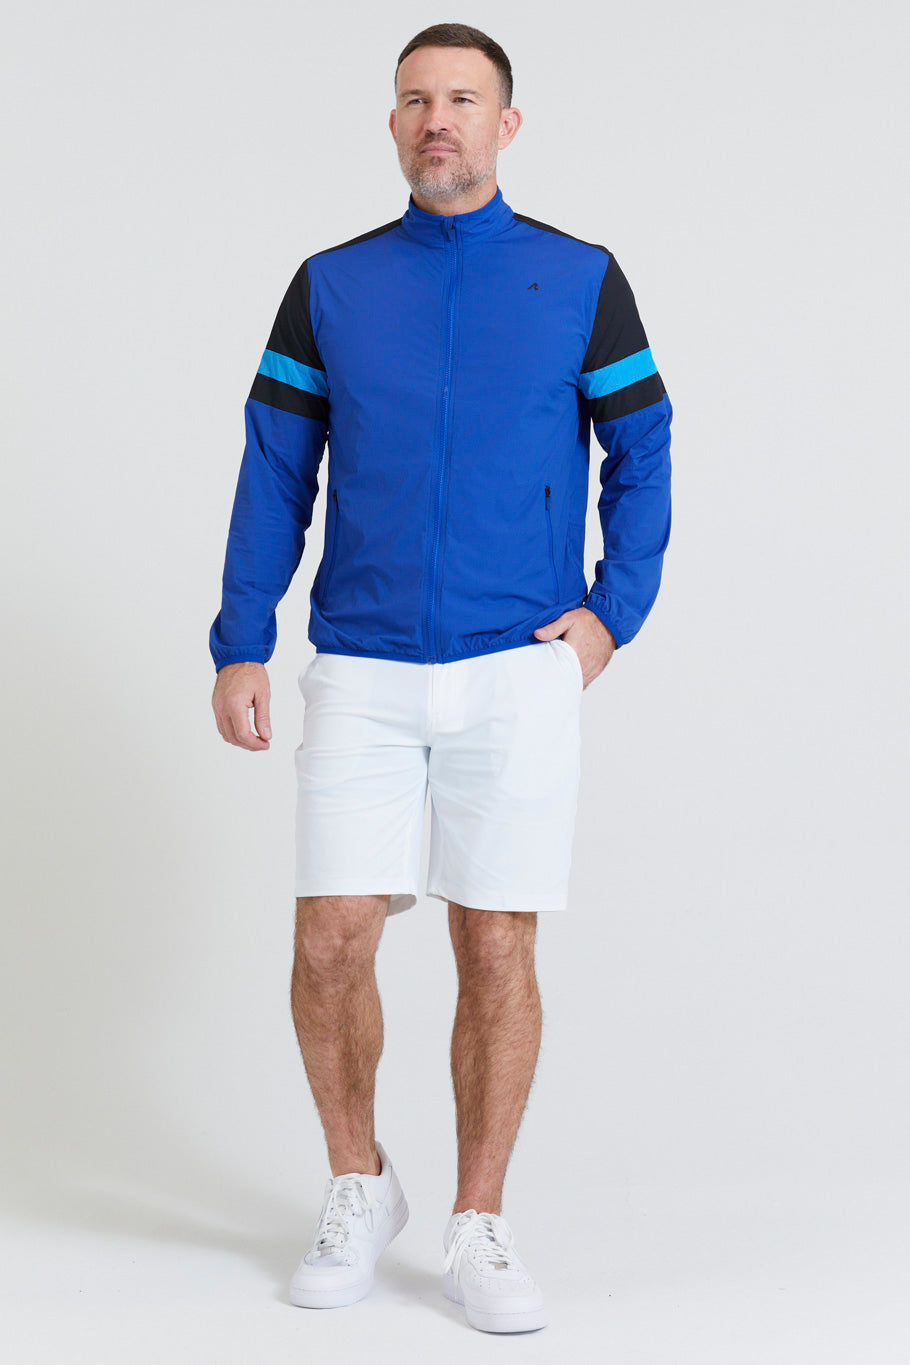 Image of the elston windbreaker in olympic ss23